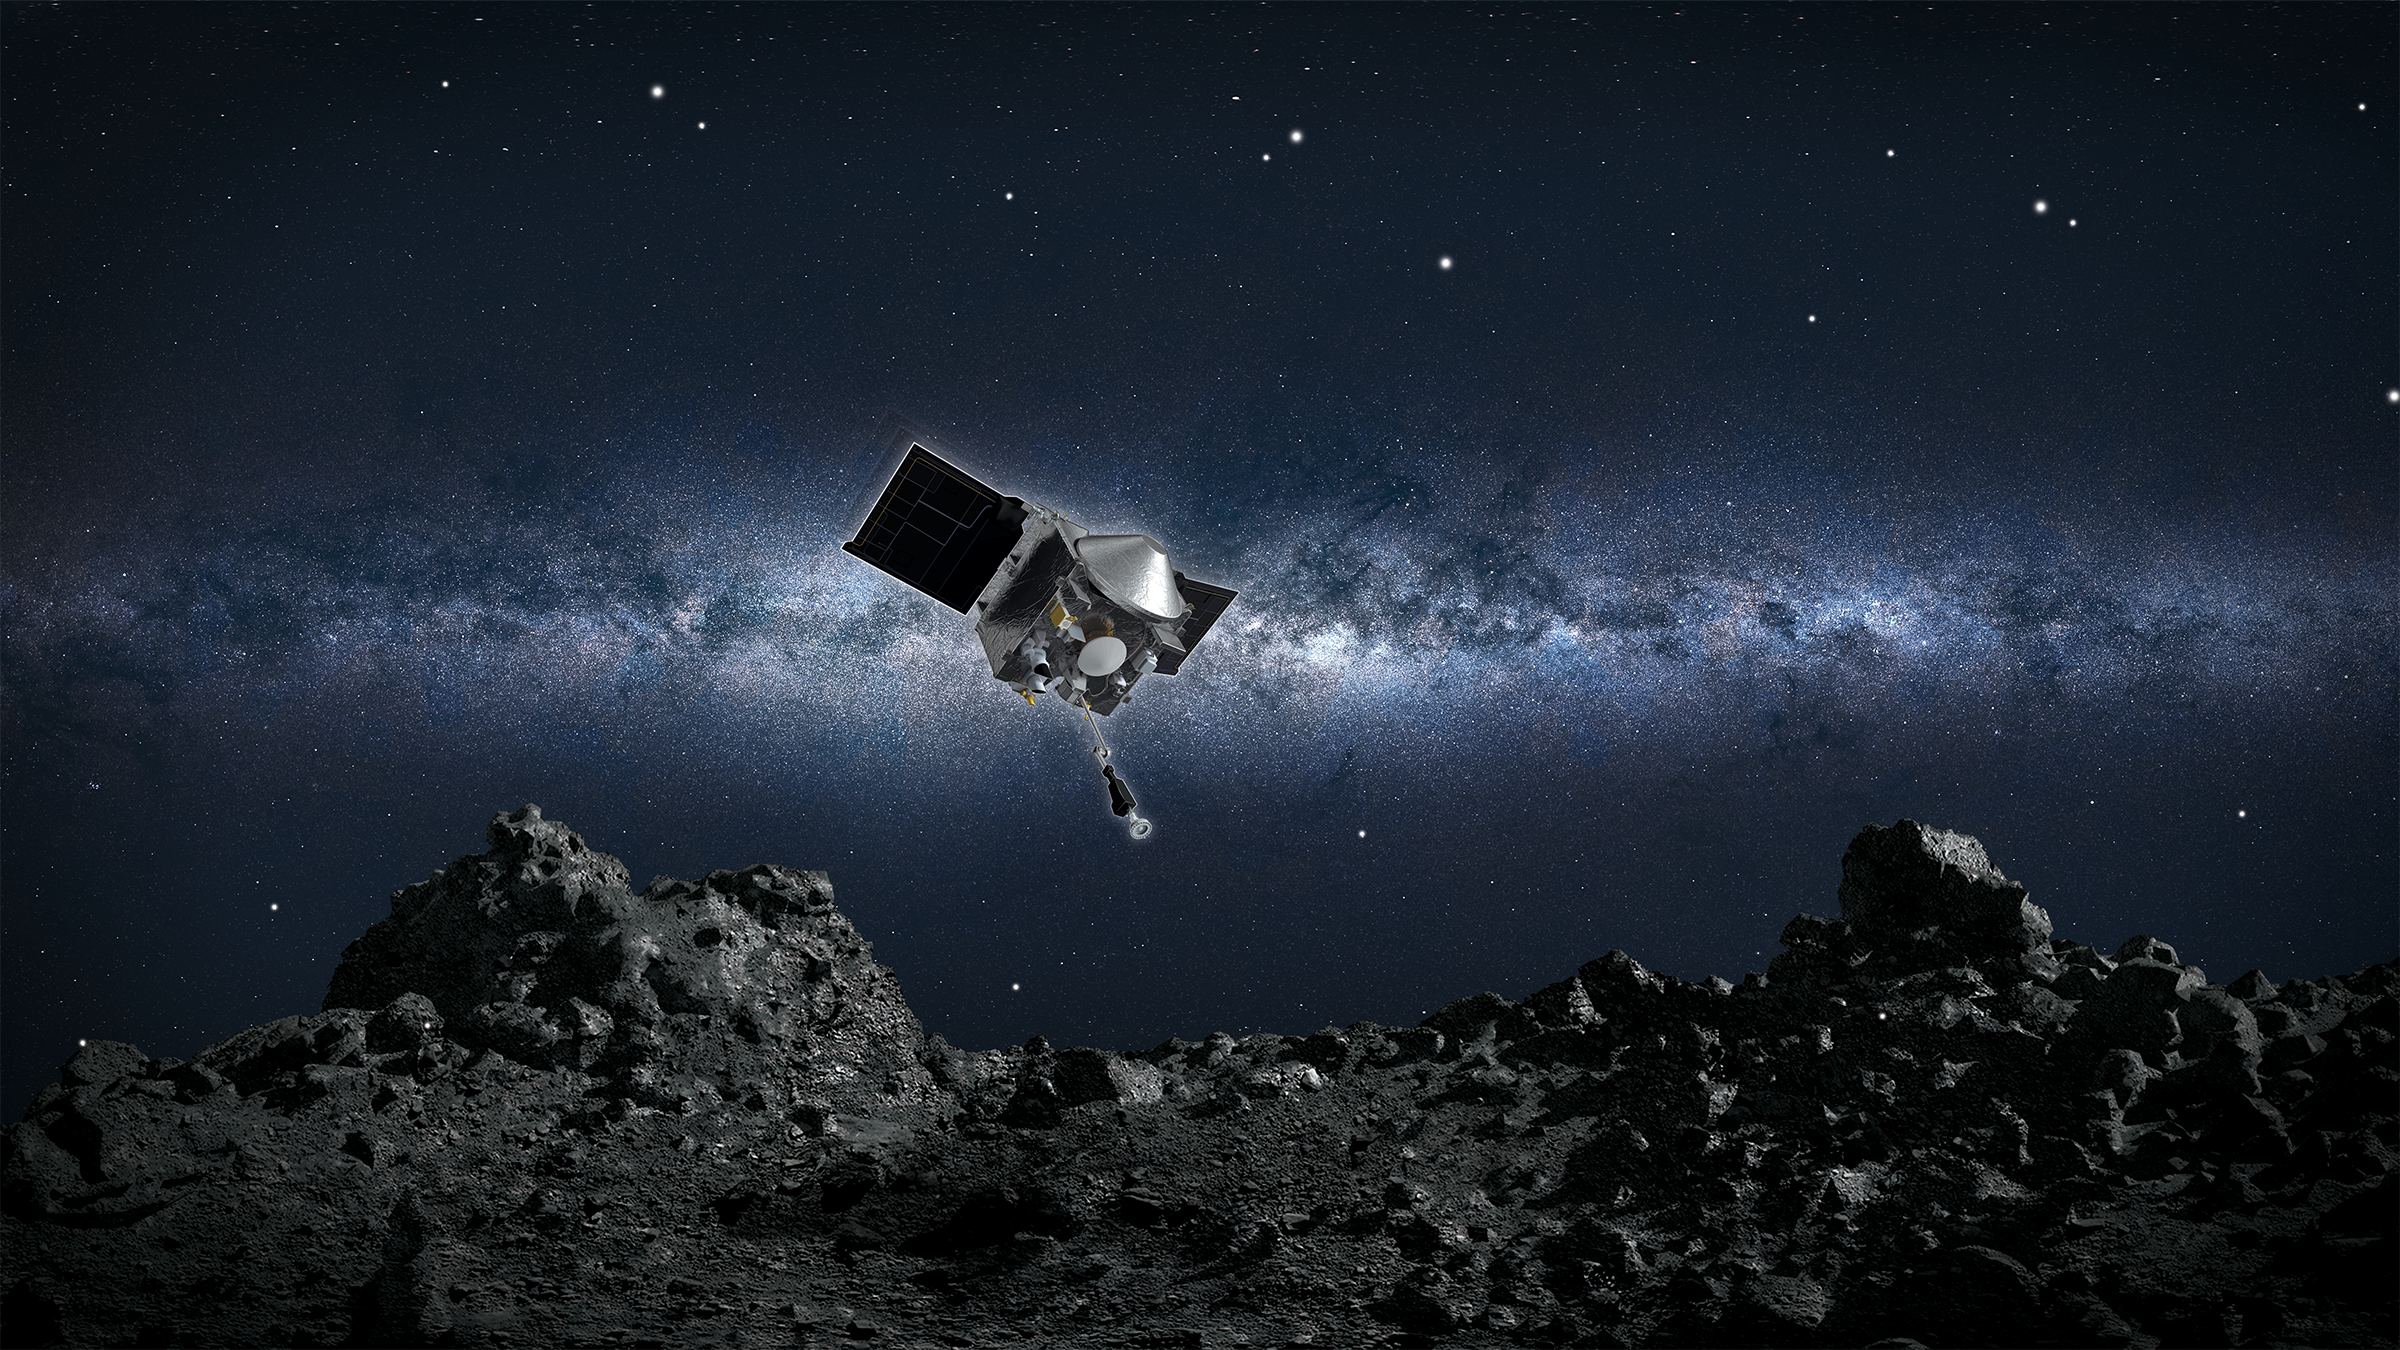 OSIRIS-REx asteroid samples will land on Earth in 2023 and scientists can't wait